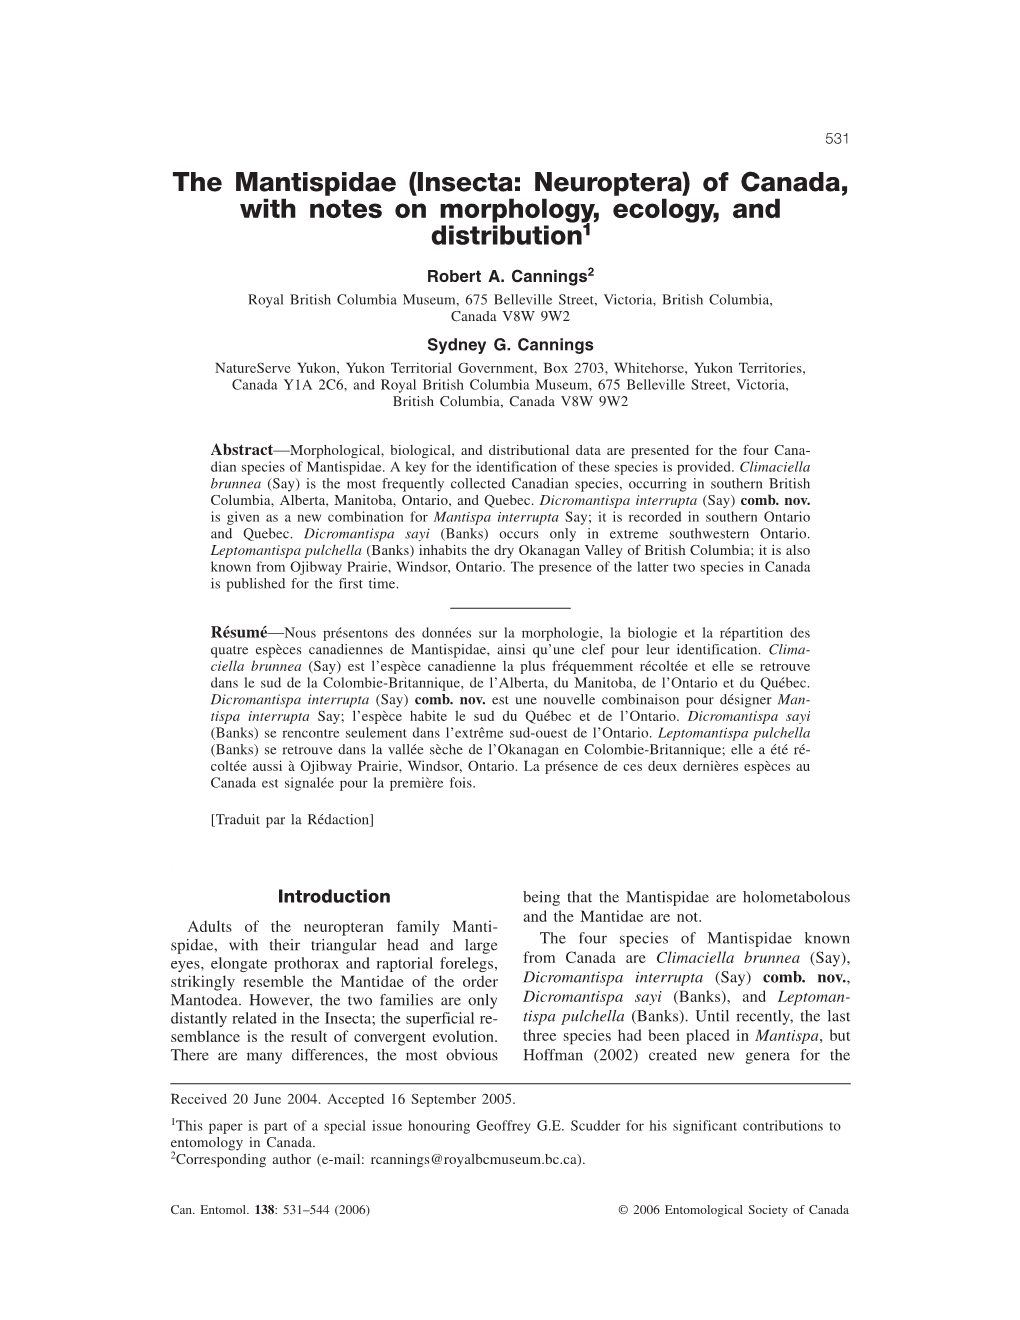 The Mantispidae (Insecta: Neuroptera) of Canada, with Notes on Morphology, Ecology, and Distribution1